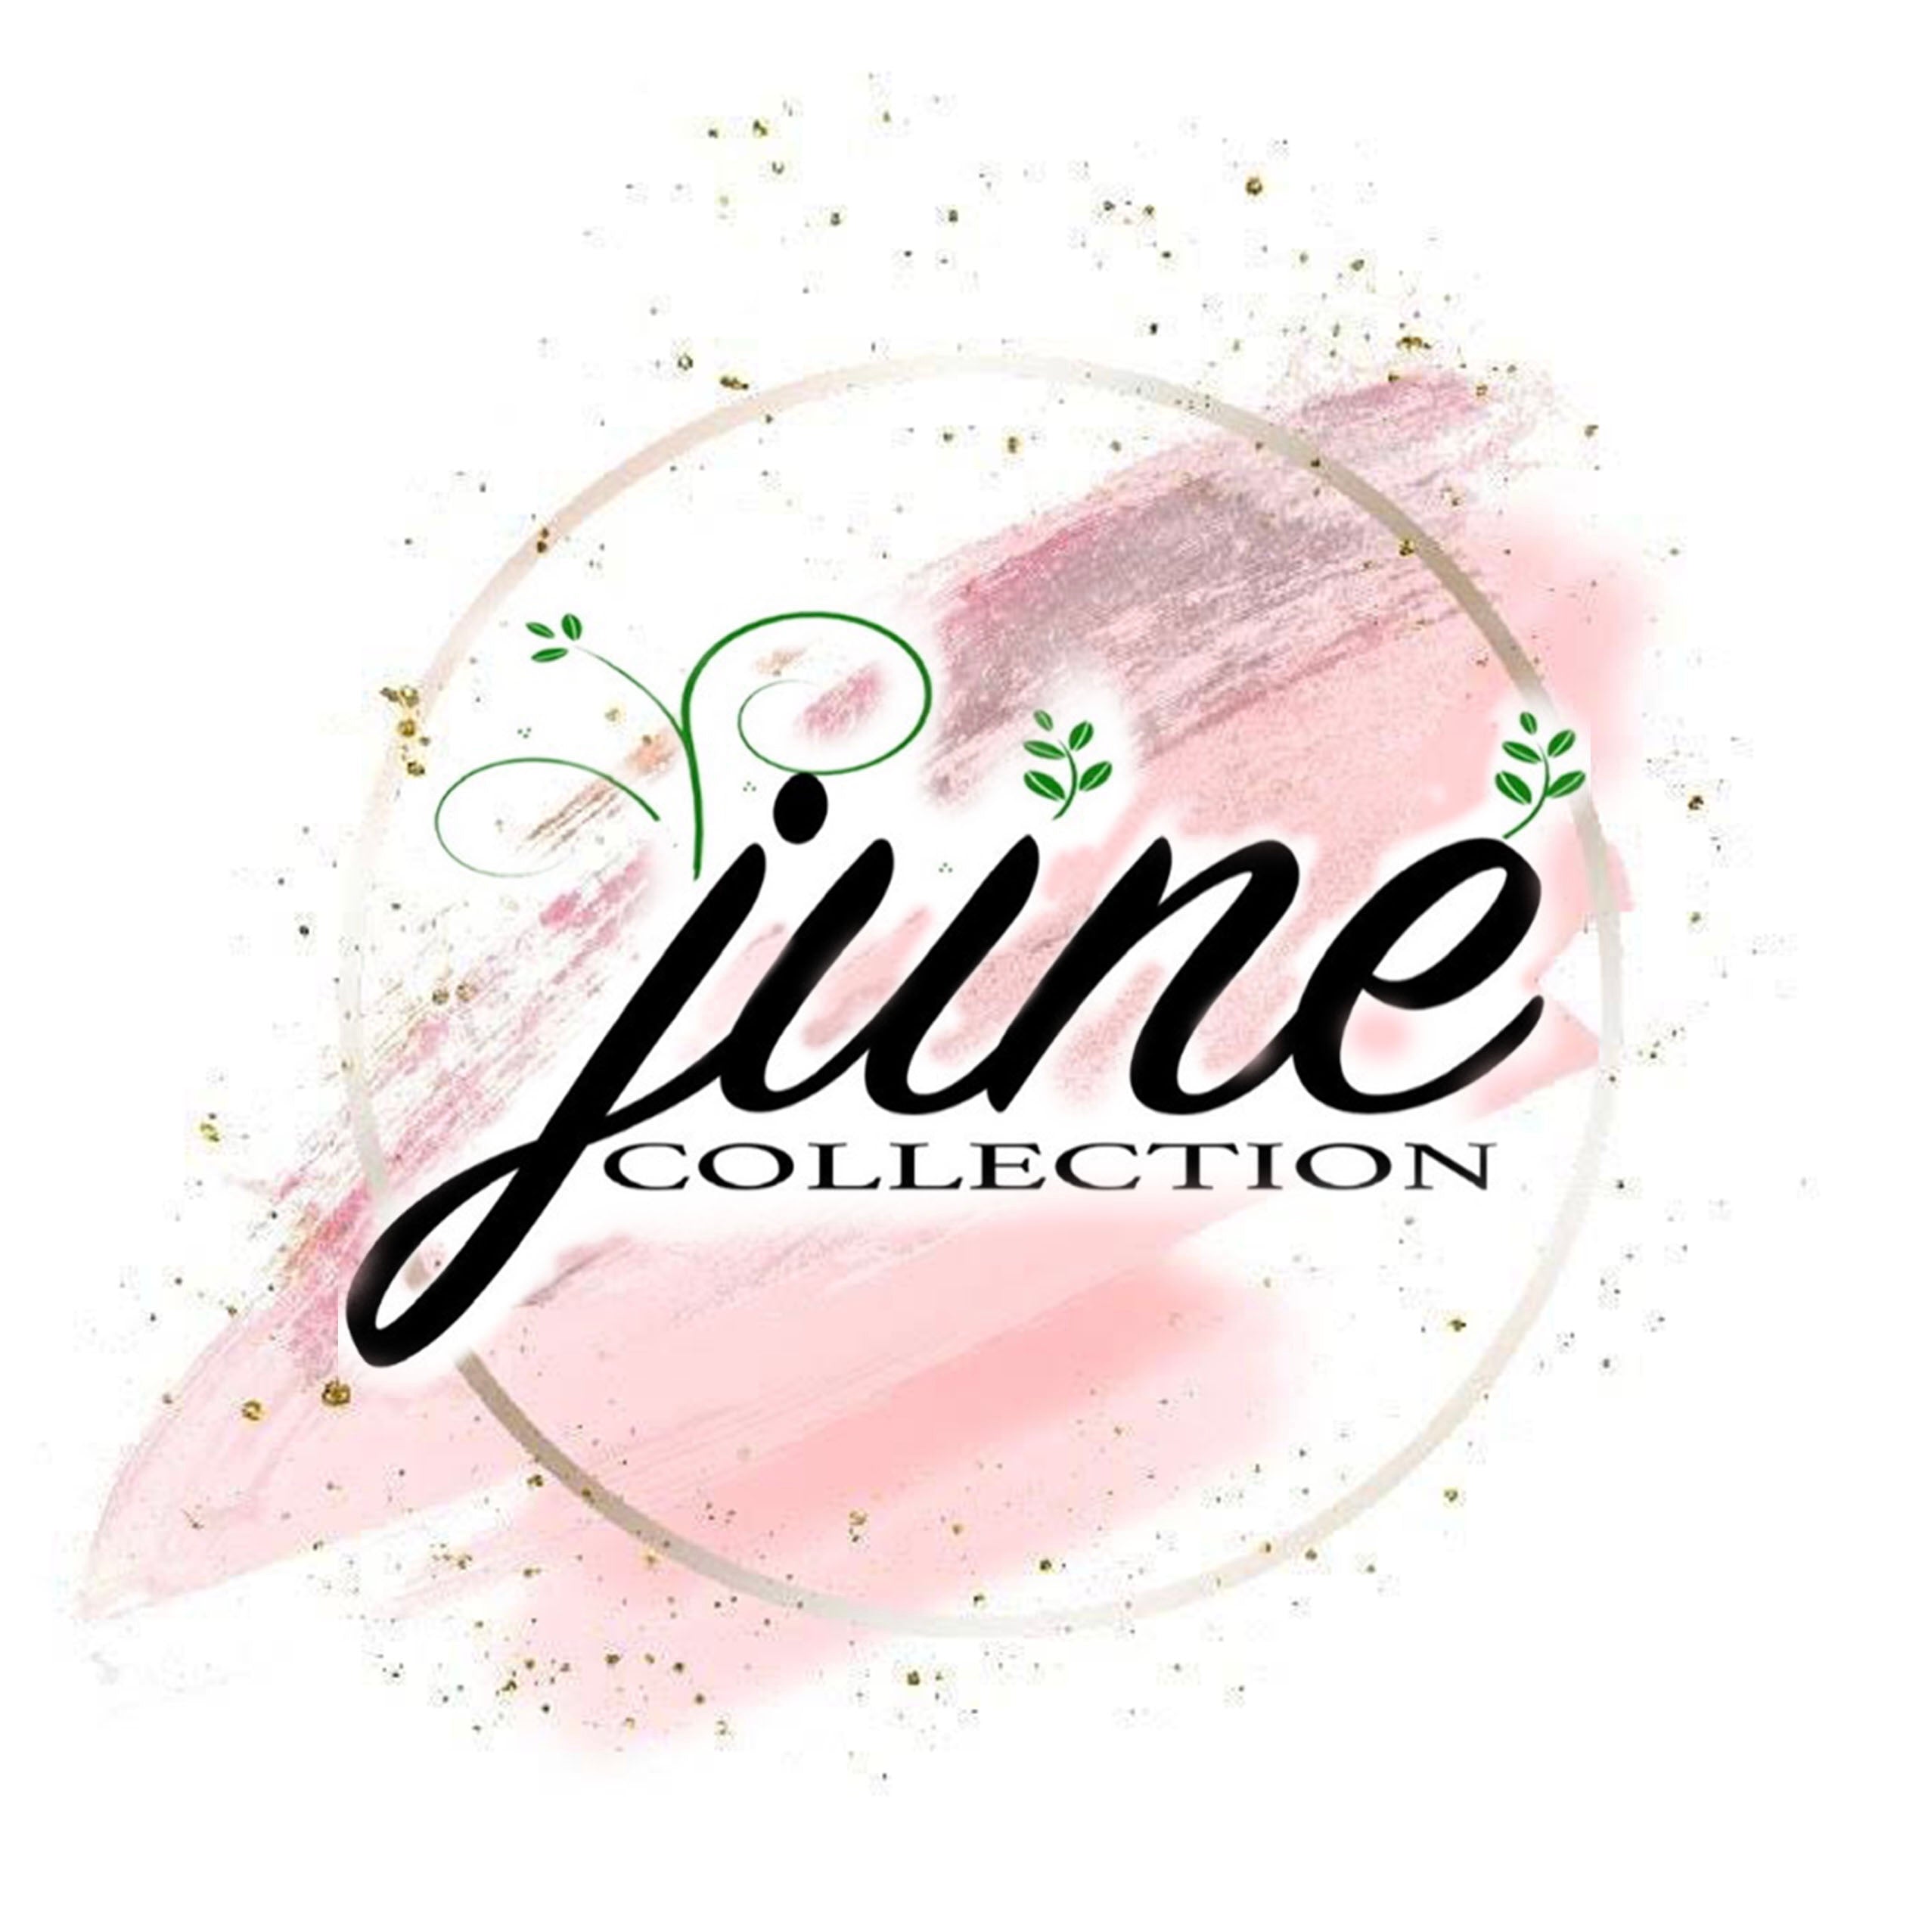 Trendy Collections by Junemma.